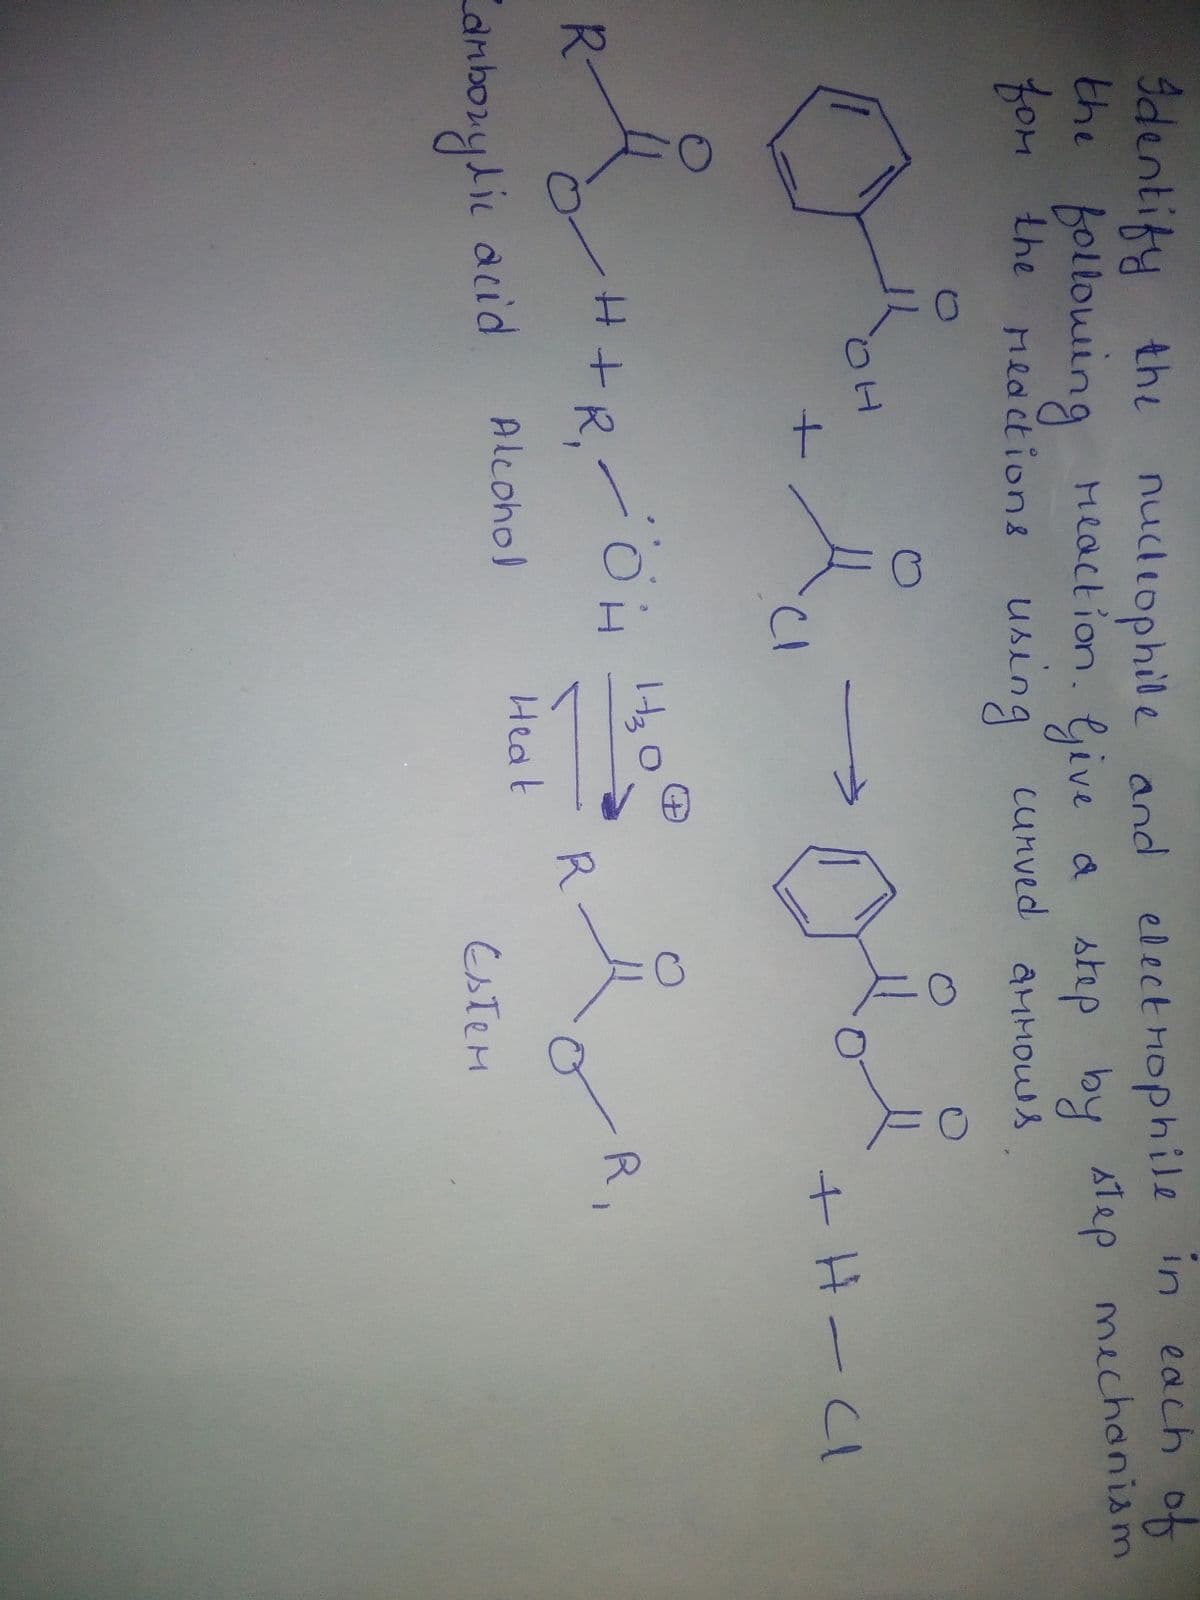 in each of
Identify the nudiophile and electhophile
the
following
foM the Medctions Us
Meaction. live a stp by Atep mechanism
step by
Lng cunved aMMows
CI
OH
R-
H+R,"
R
R
Heat
acid
Alcohol
EsteM
